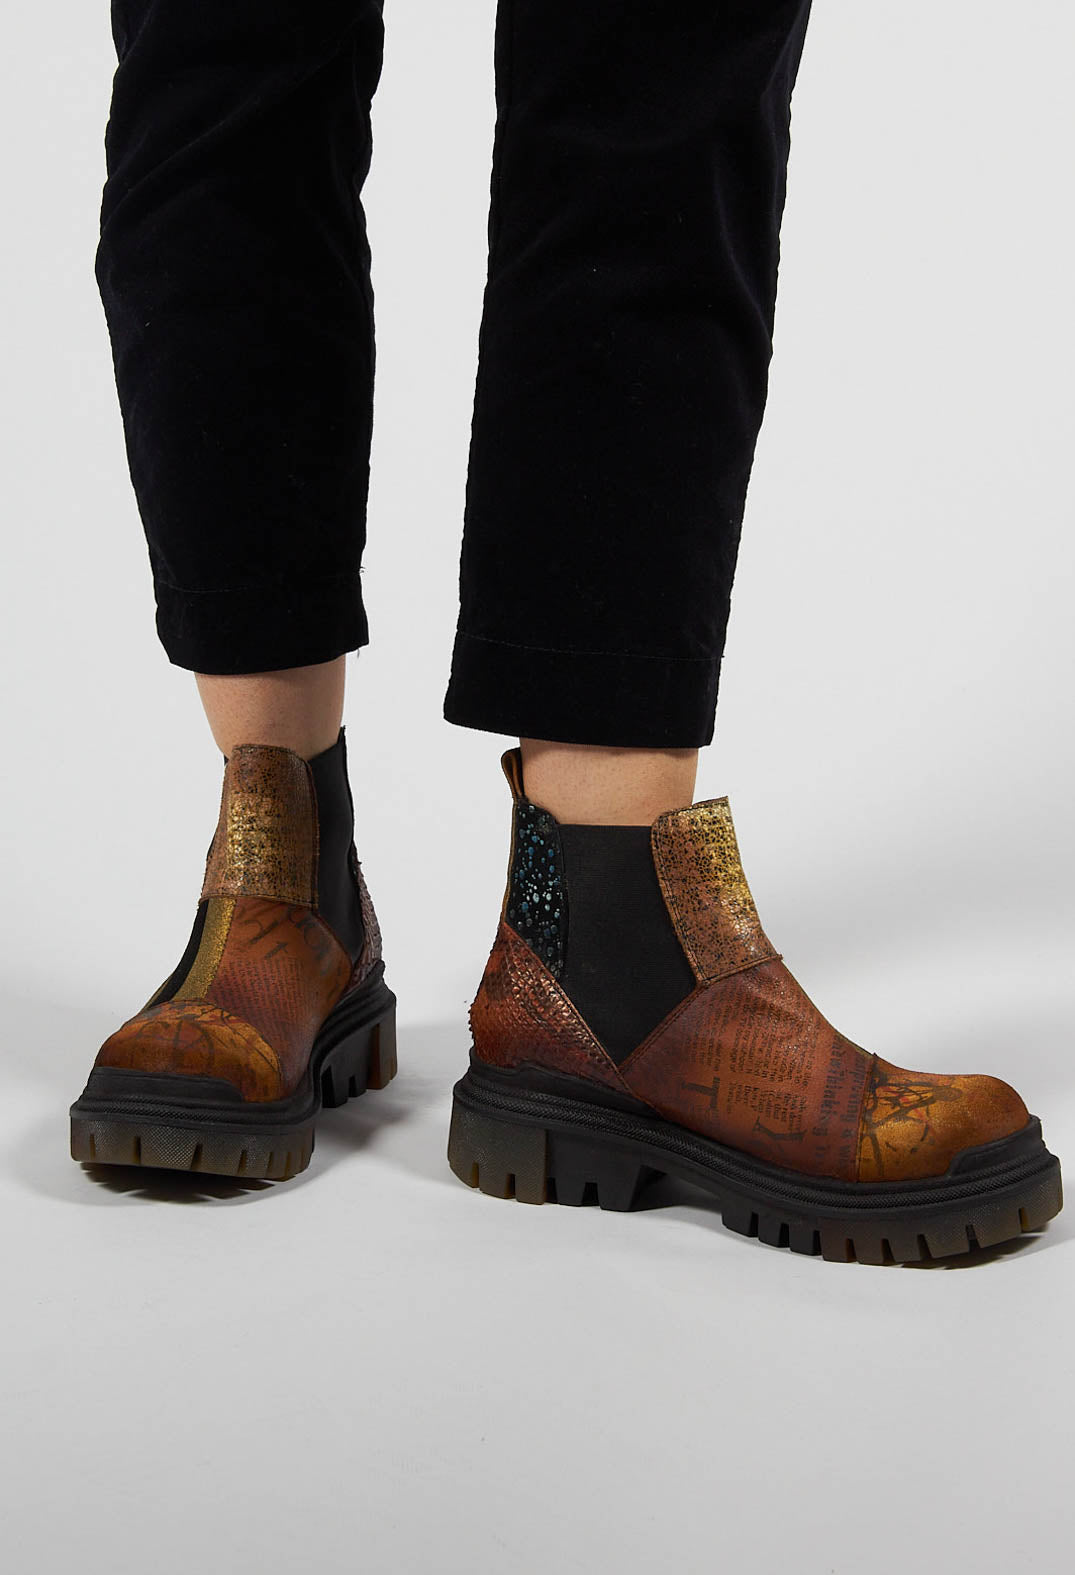 Cetus Boots in Multi-Pattern